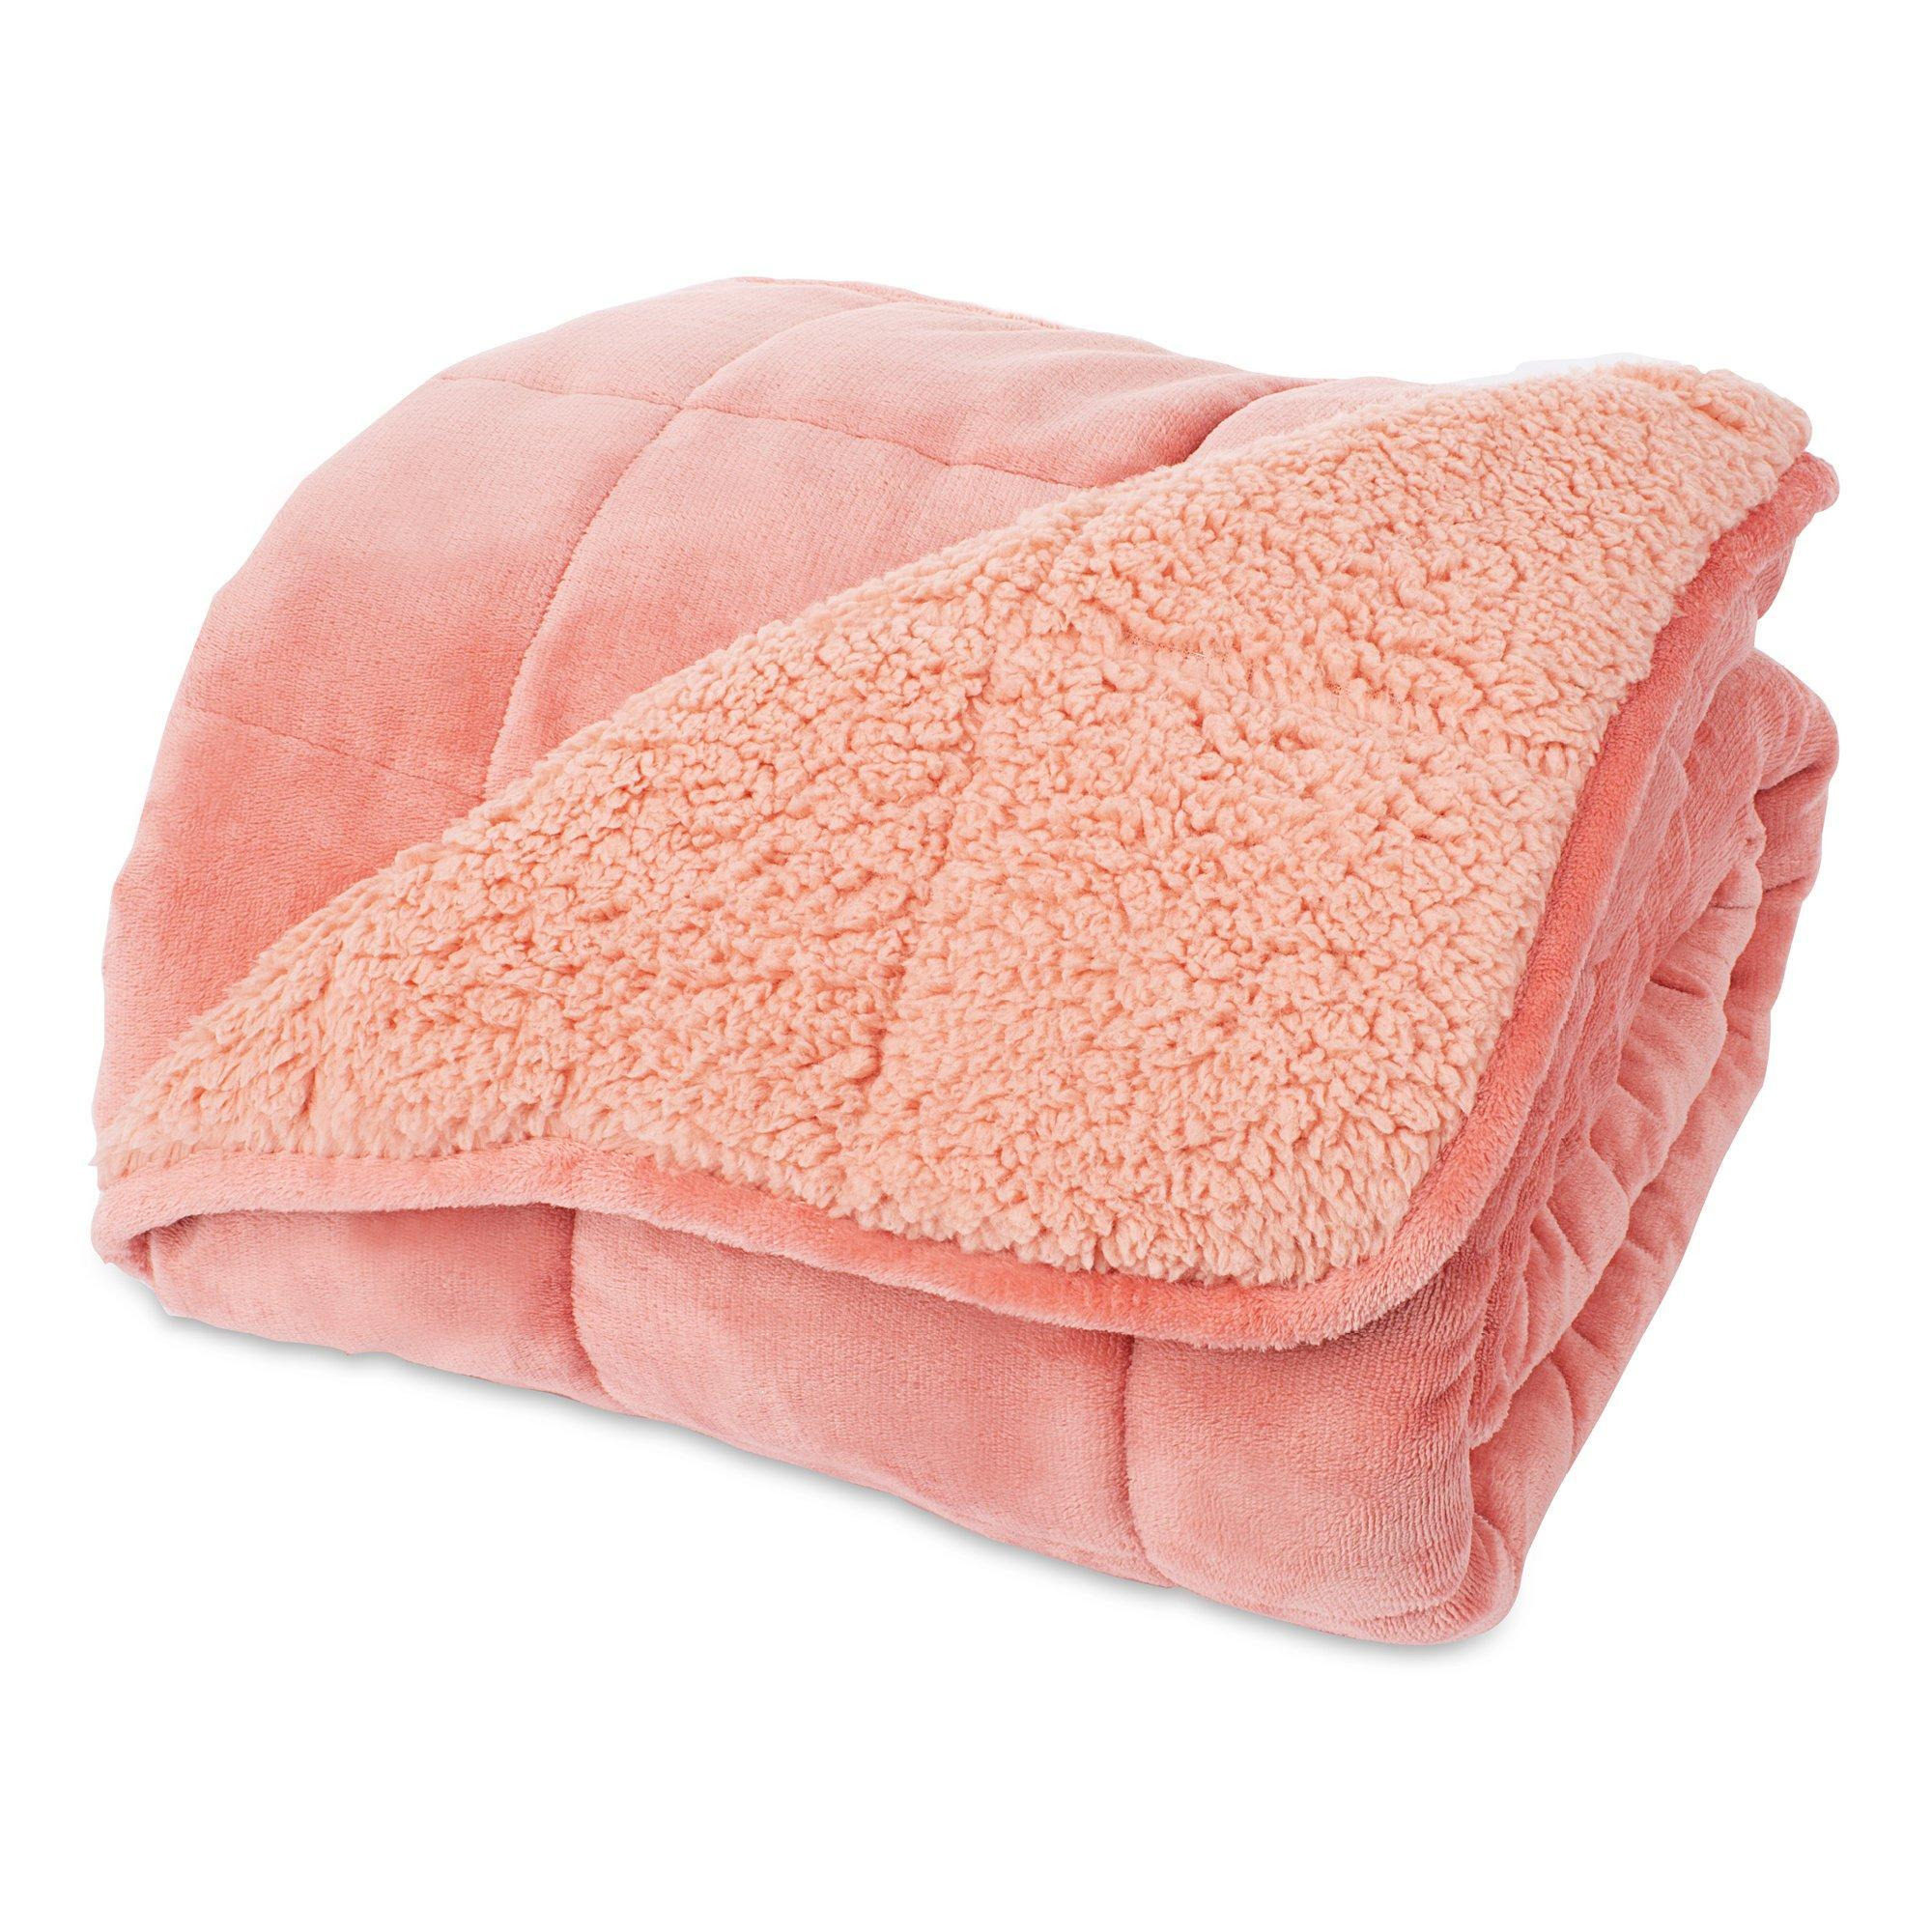 Weighted Sherpa Throw Blanket - image 1